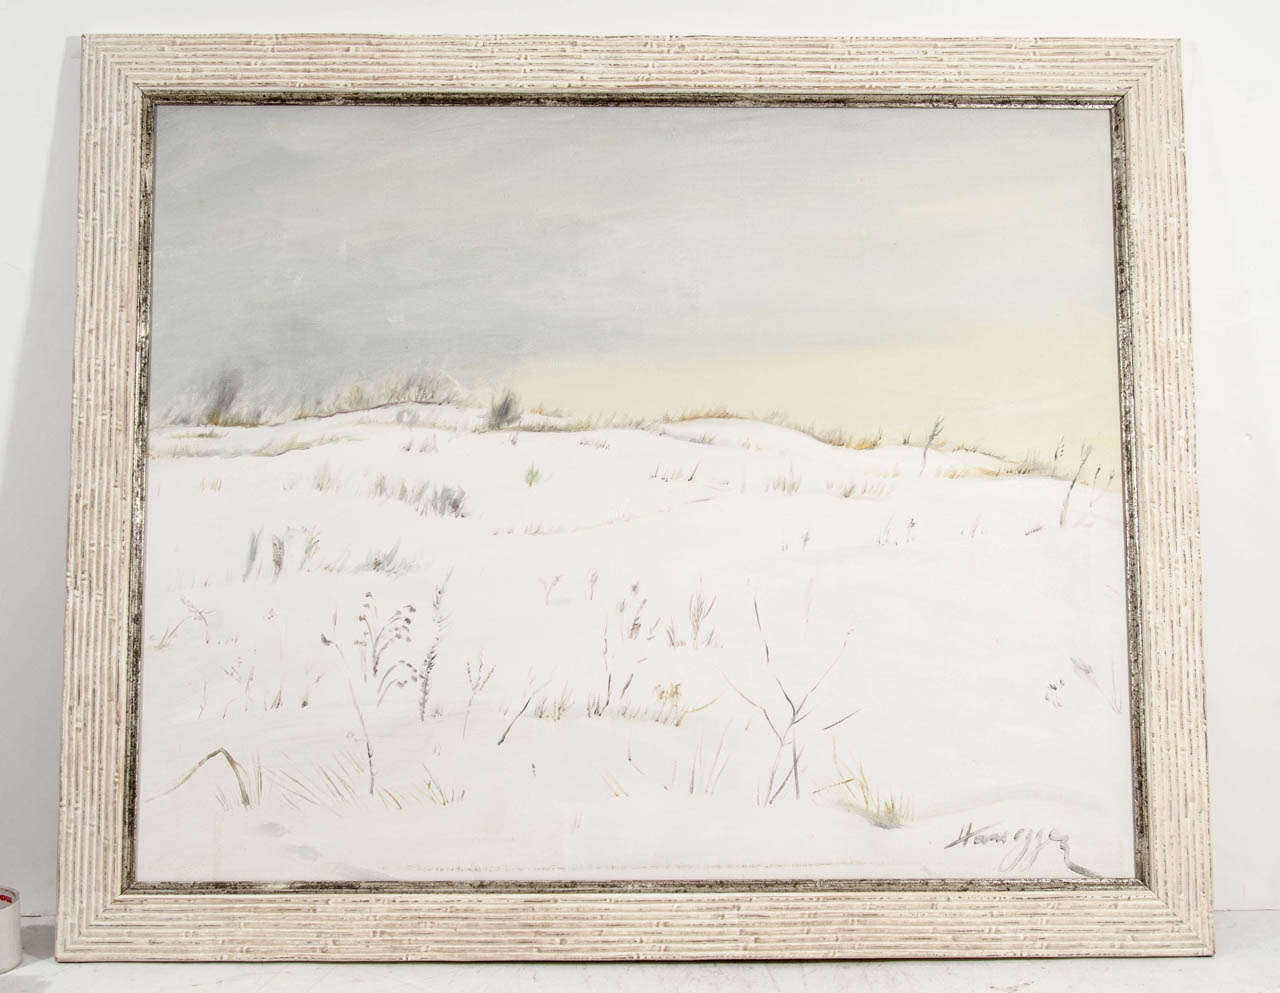 A Columbia County Plein Air impressionist oil on canvas snow scene by Swiss-American Artist John Konstantin Hansegger. The piece is signed in the lower right.

John Konstantin Hansegger (1908-1989) was a unique figure in 20th Century Art, working